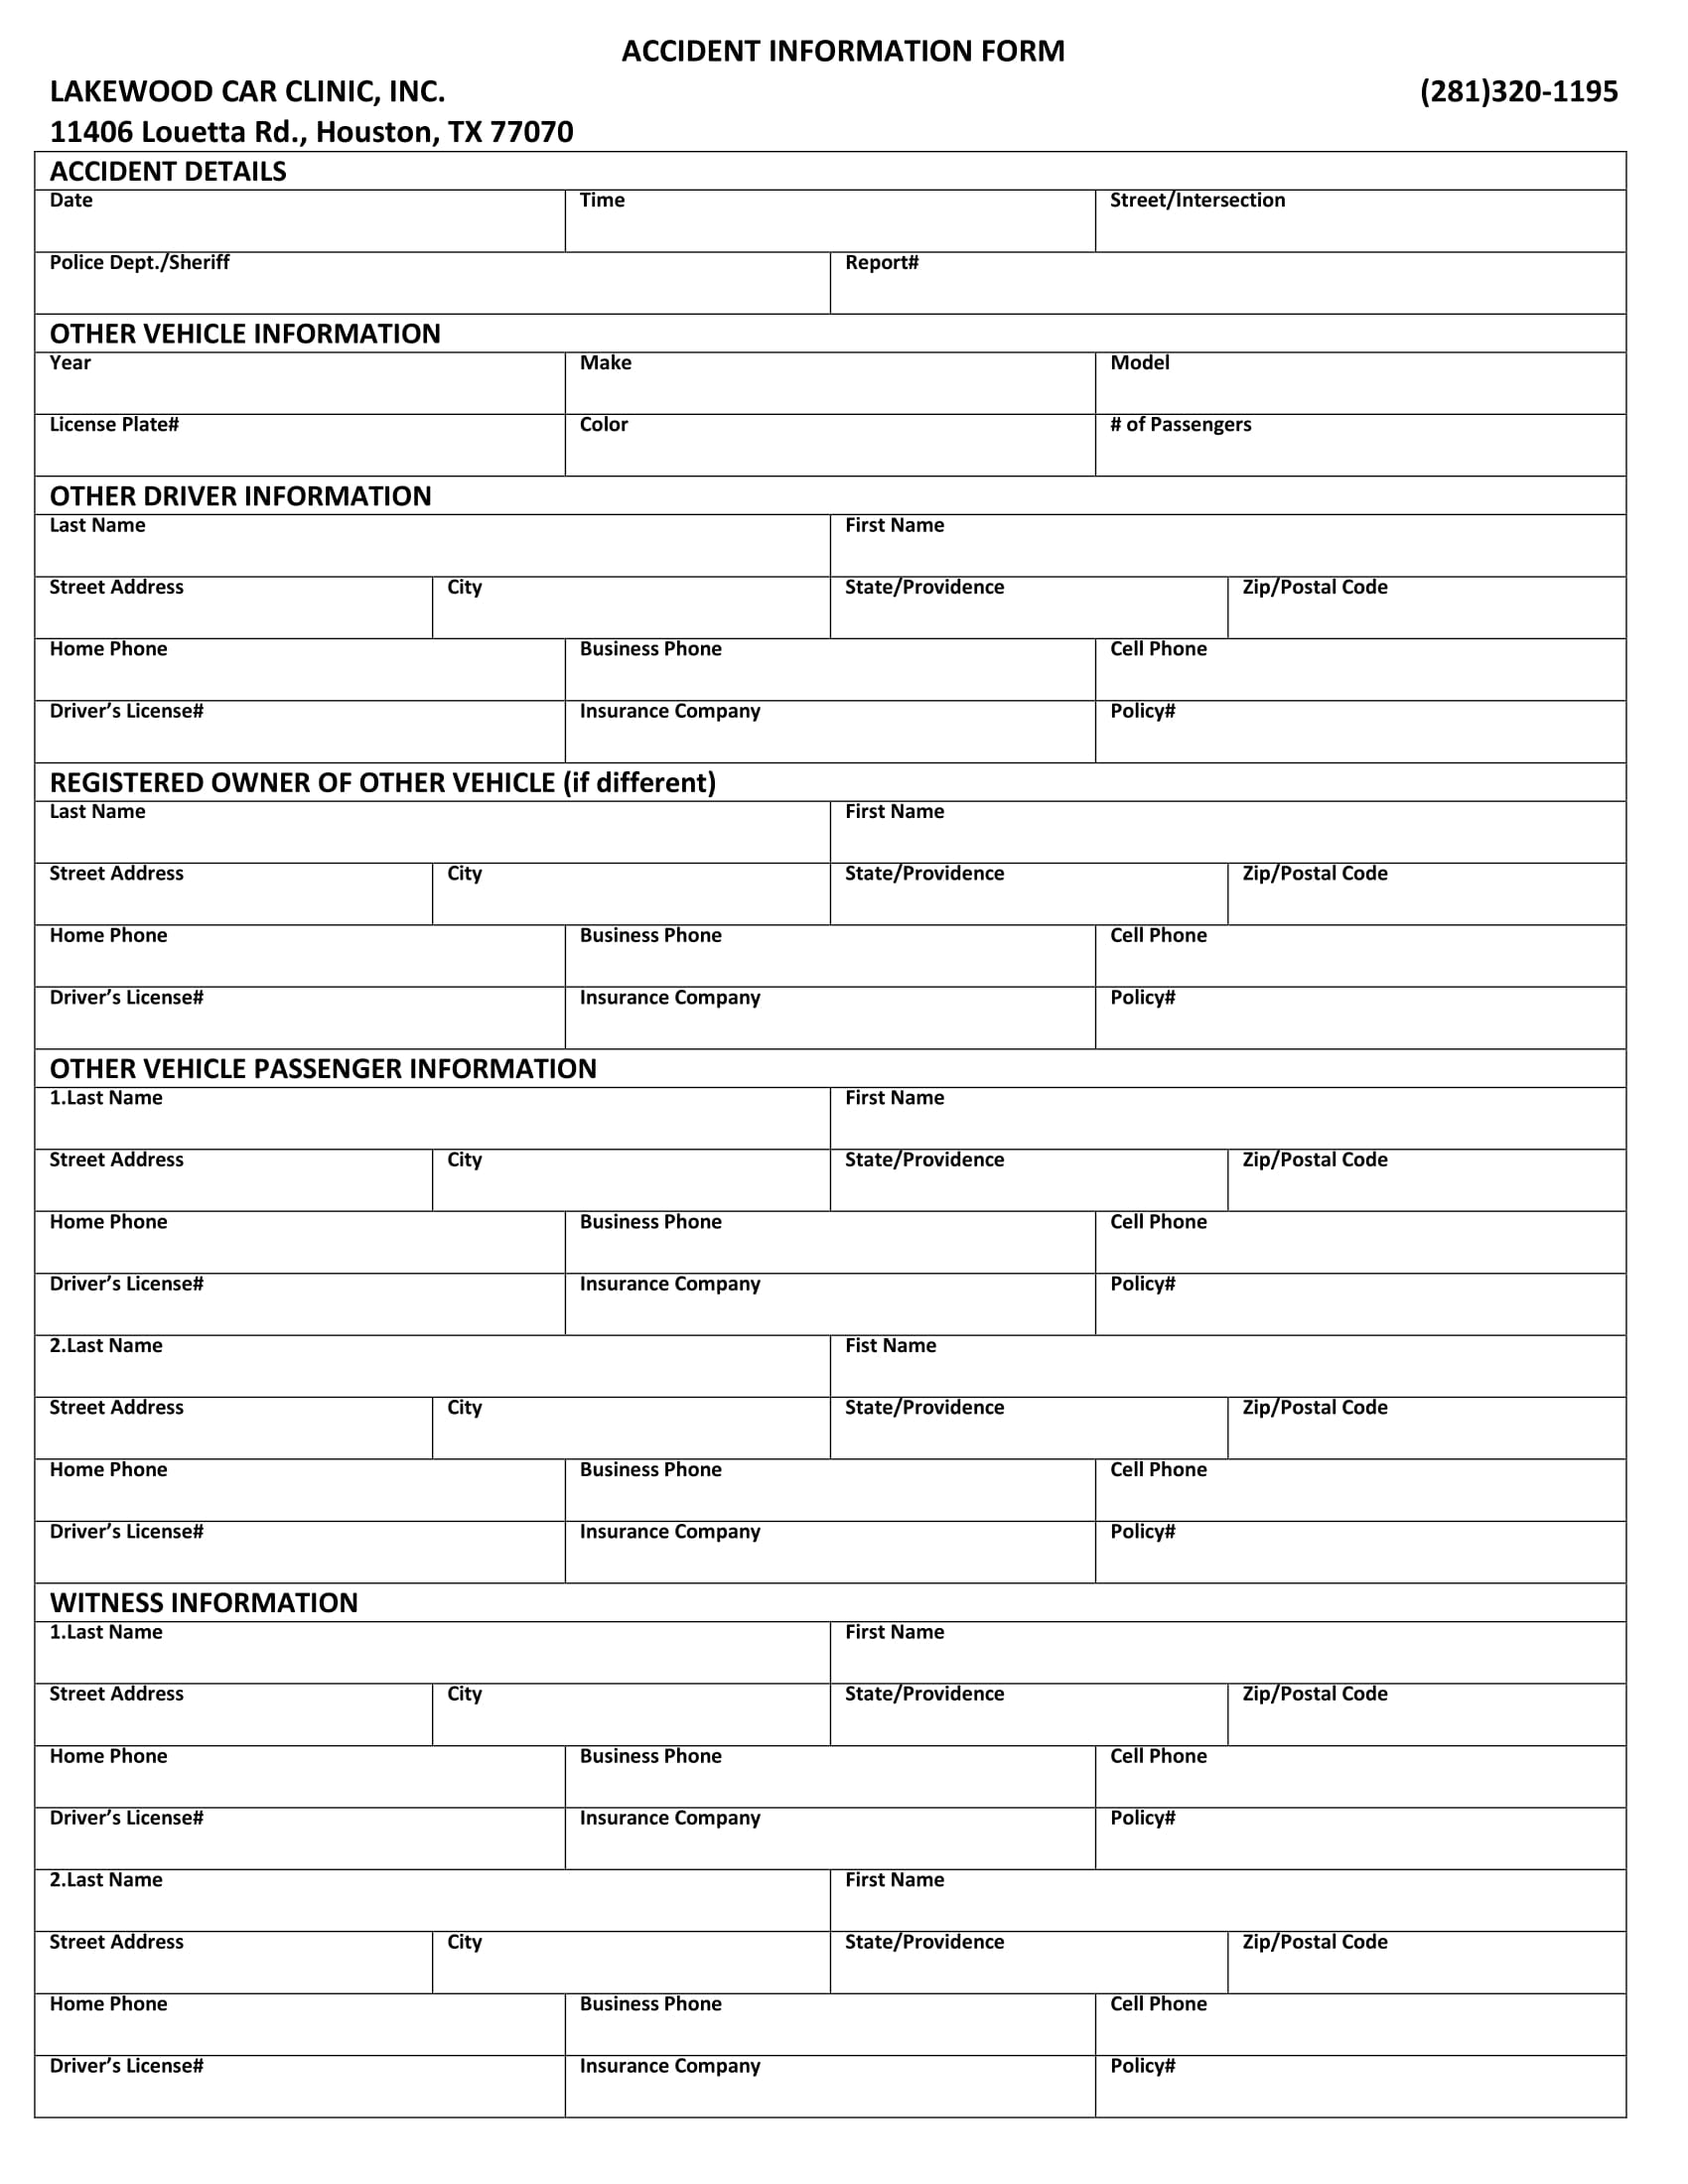 detailed accident information form 1